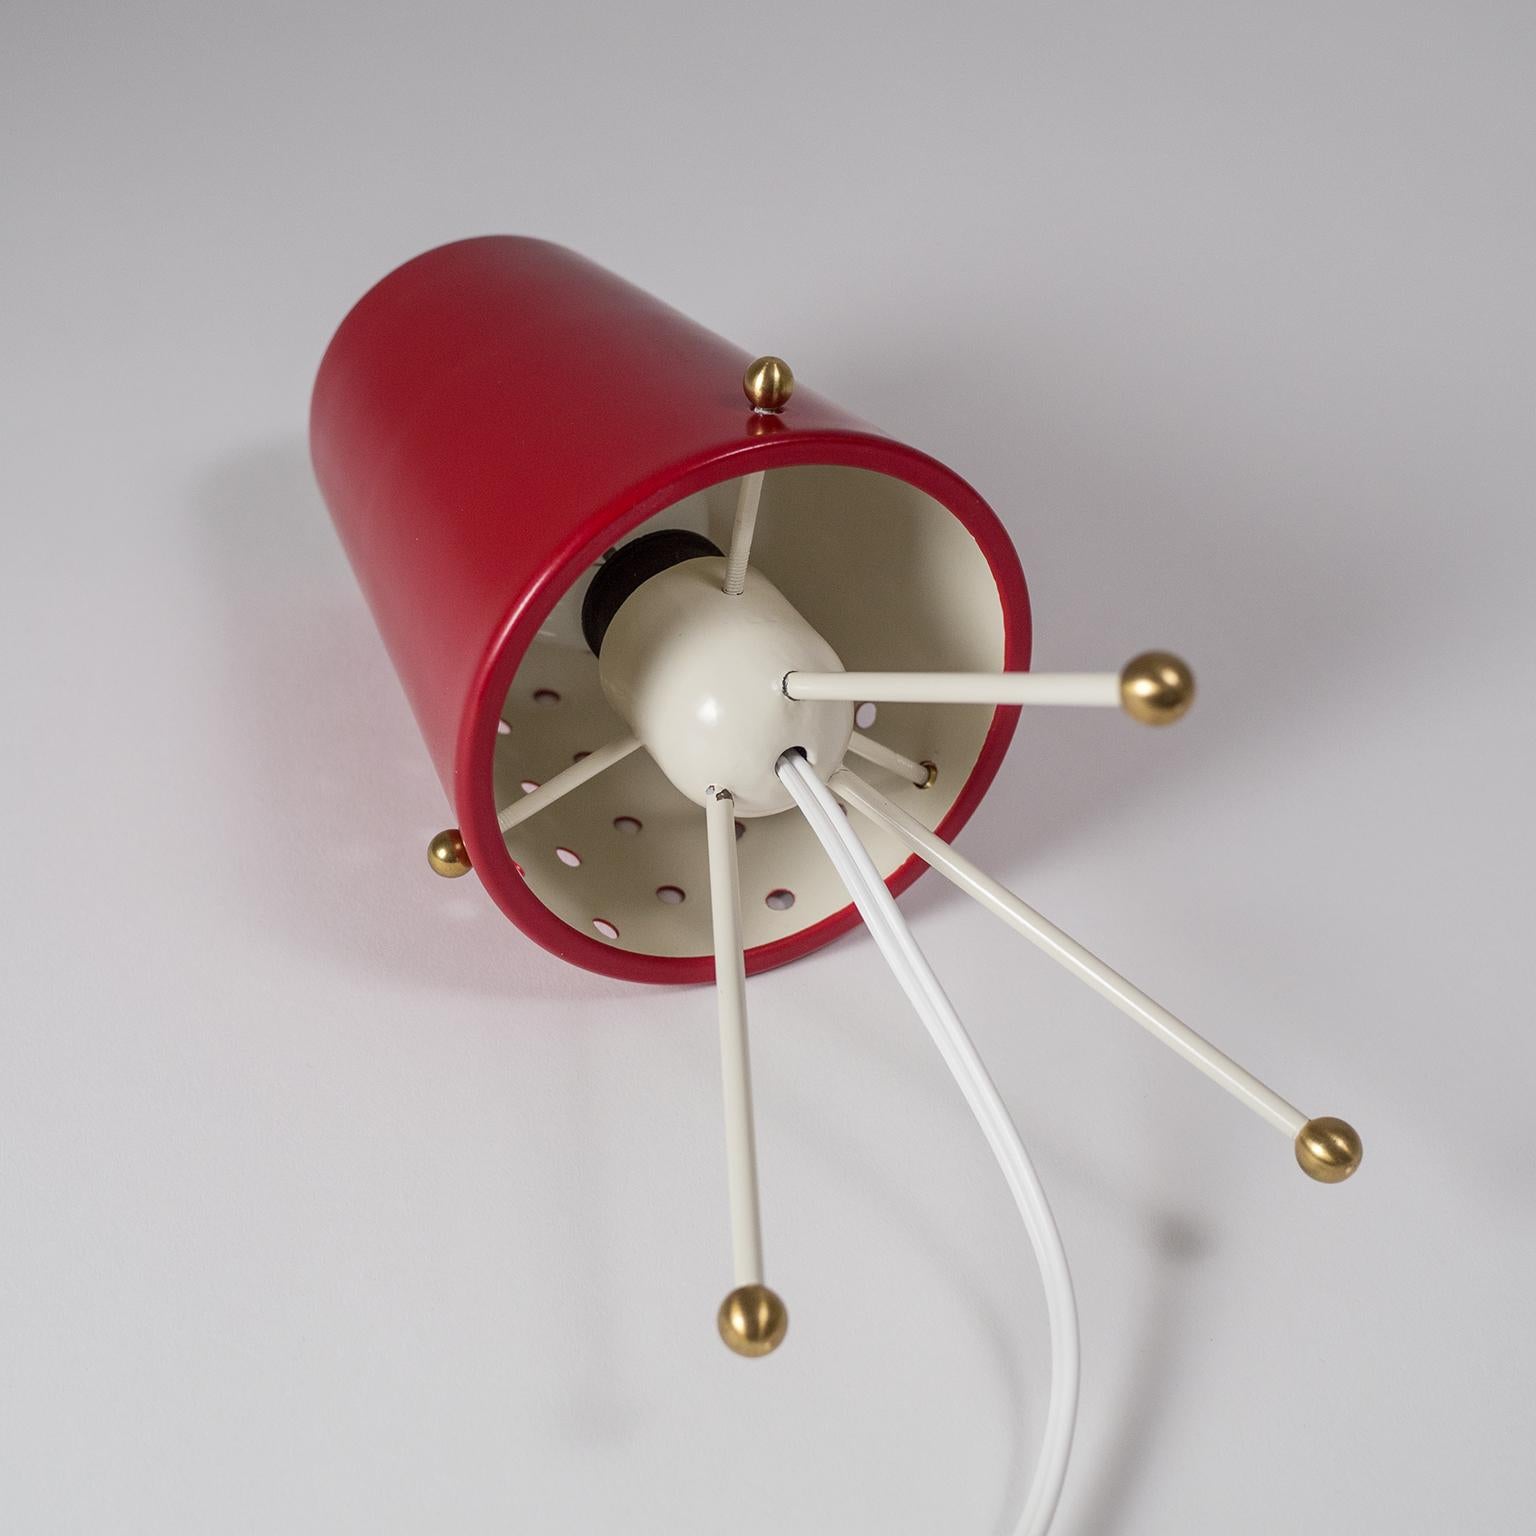 European Table Lamp with Pierced Red Shade and Brass Details, 1950s